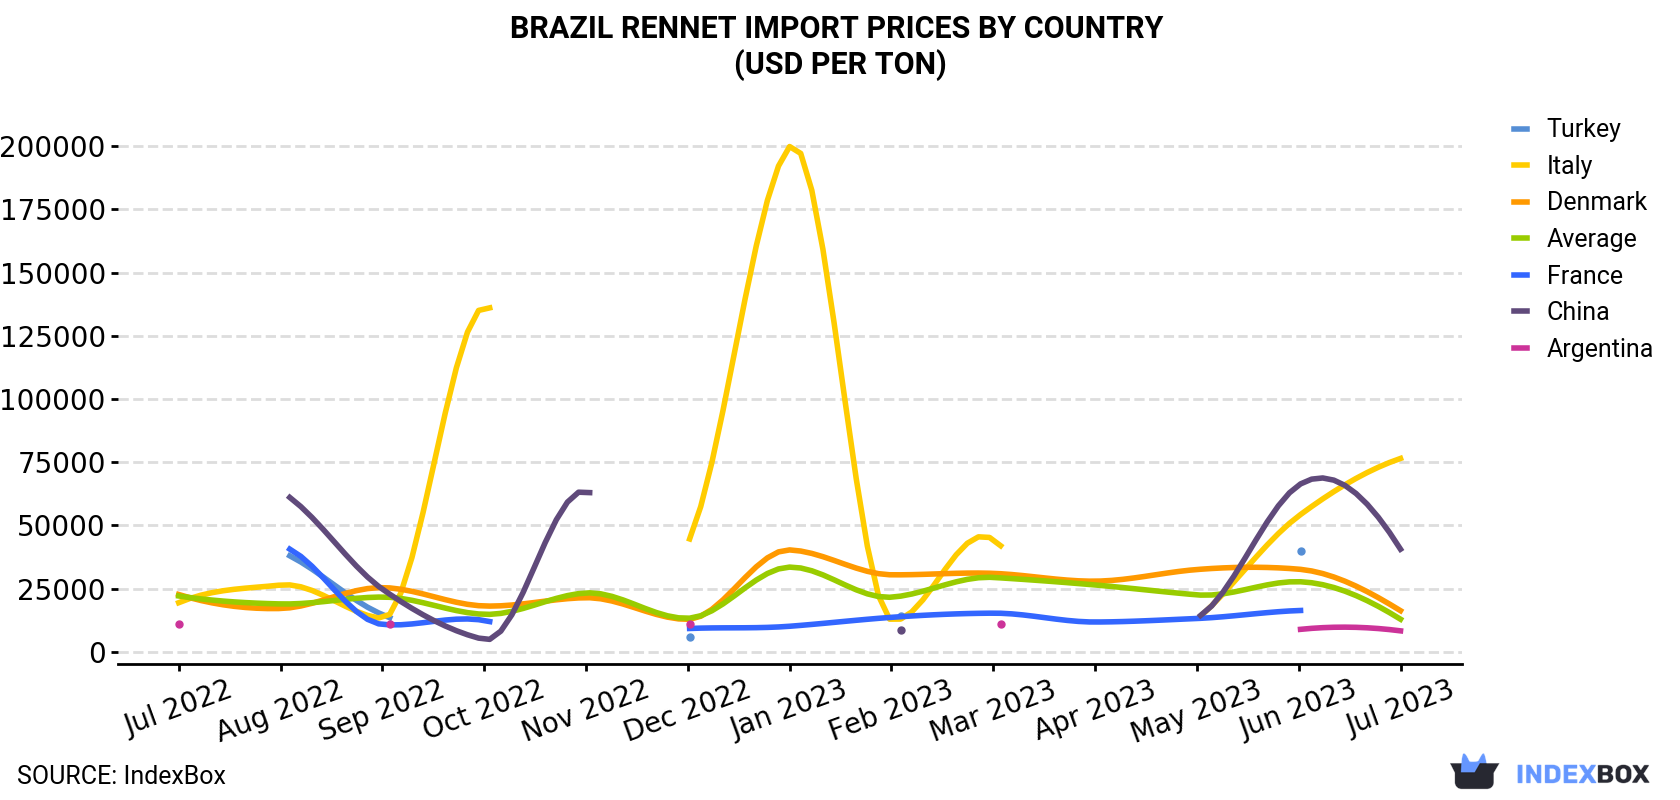 Brazil Rennet Import Prices By Country (USD Per Ton)